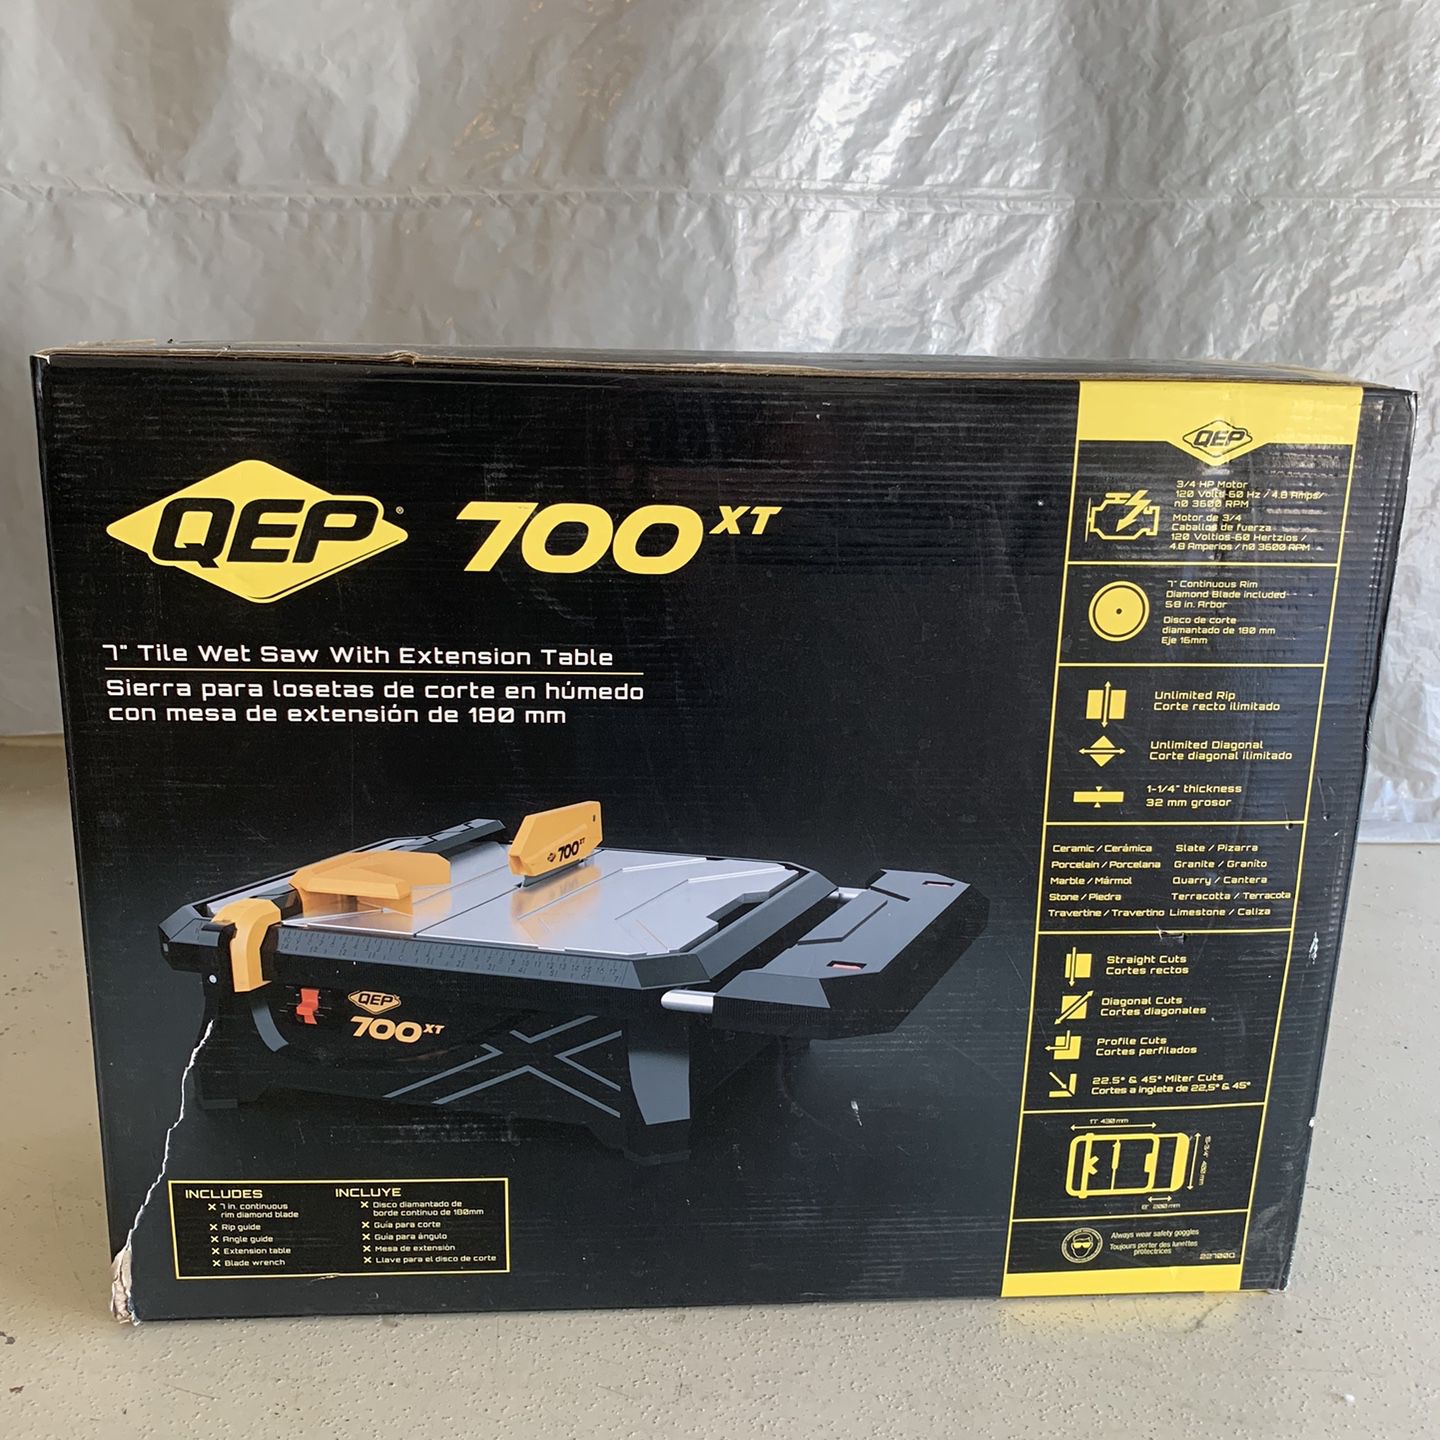 Tile Saw With Extension Table for Sale in Phoenix, AZ OfferUp